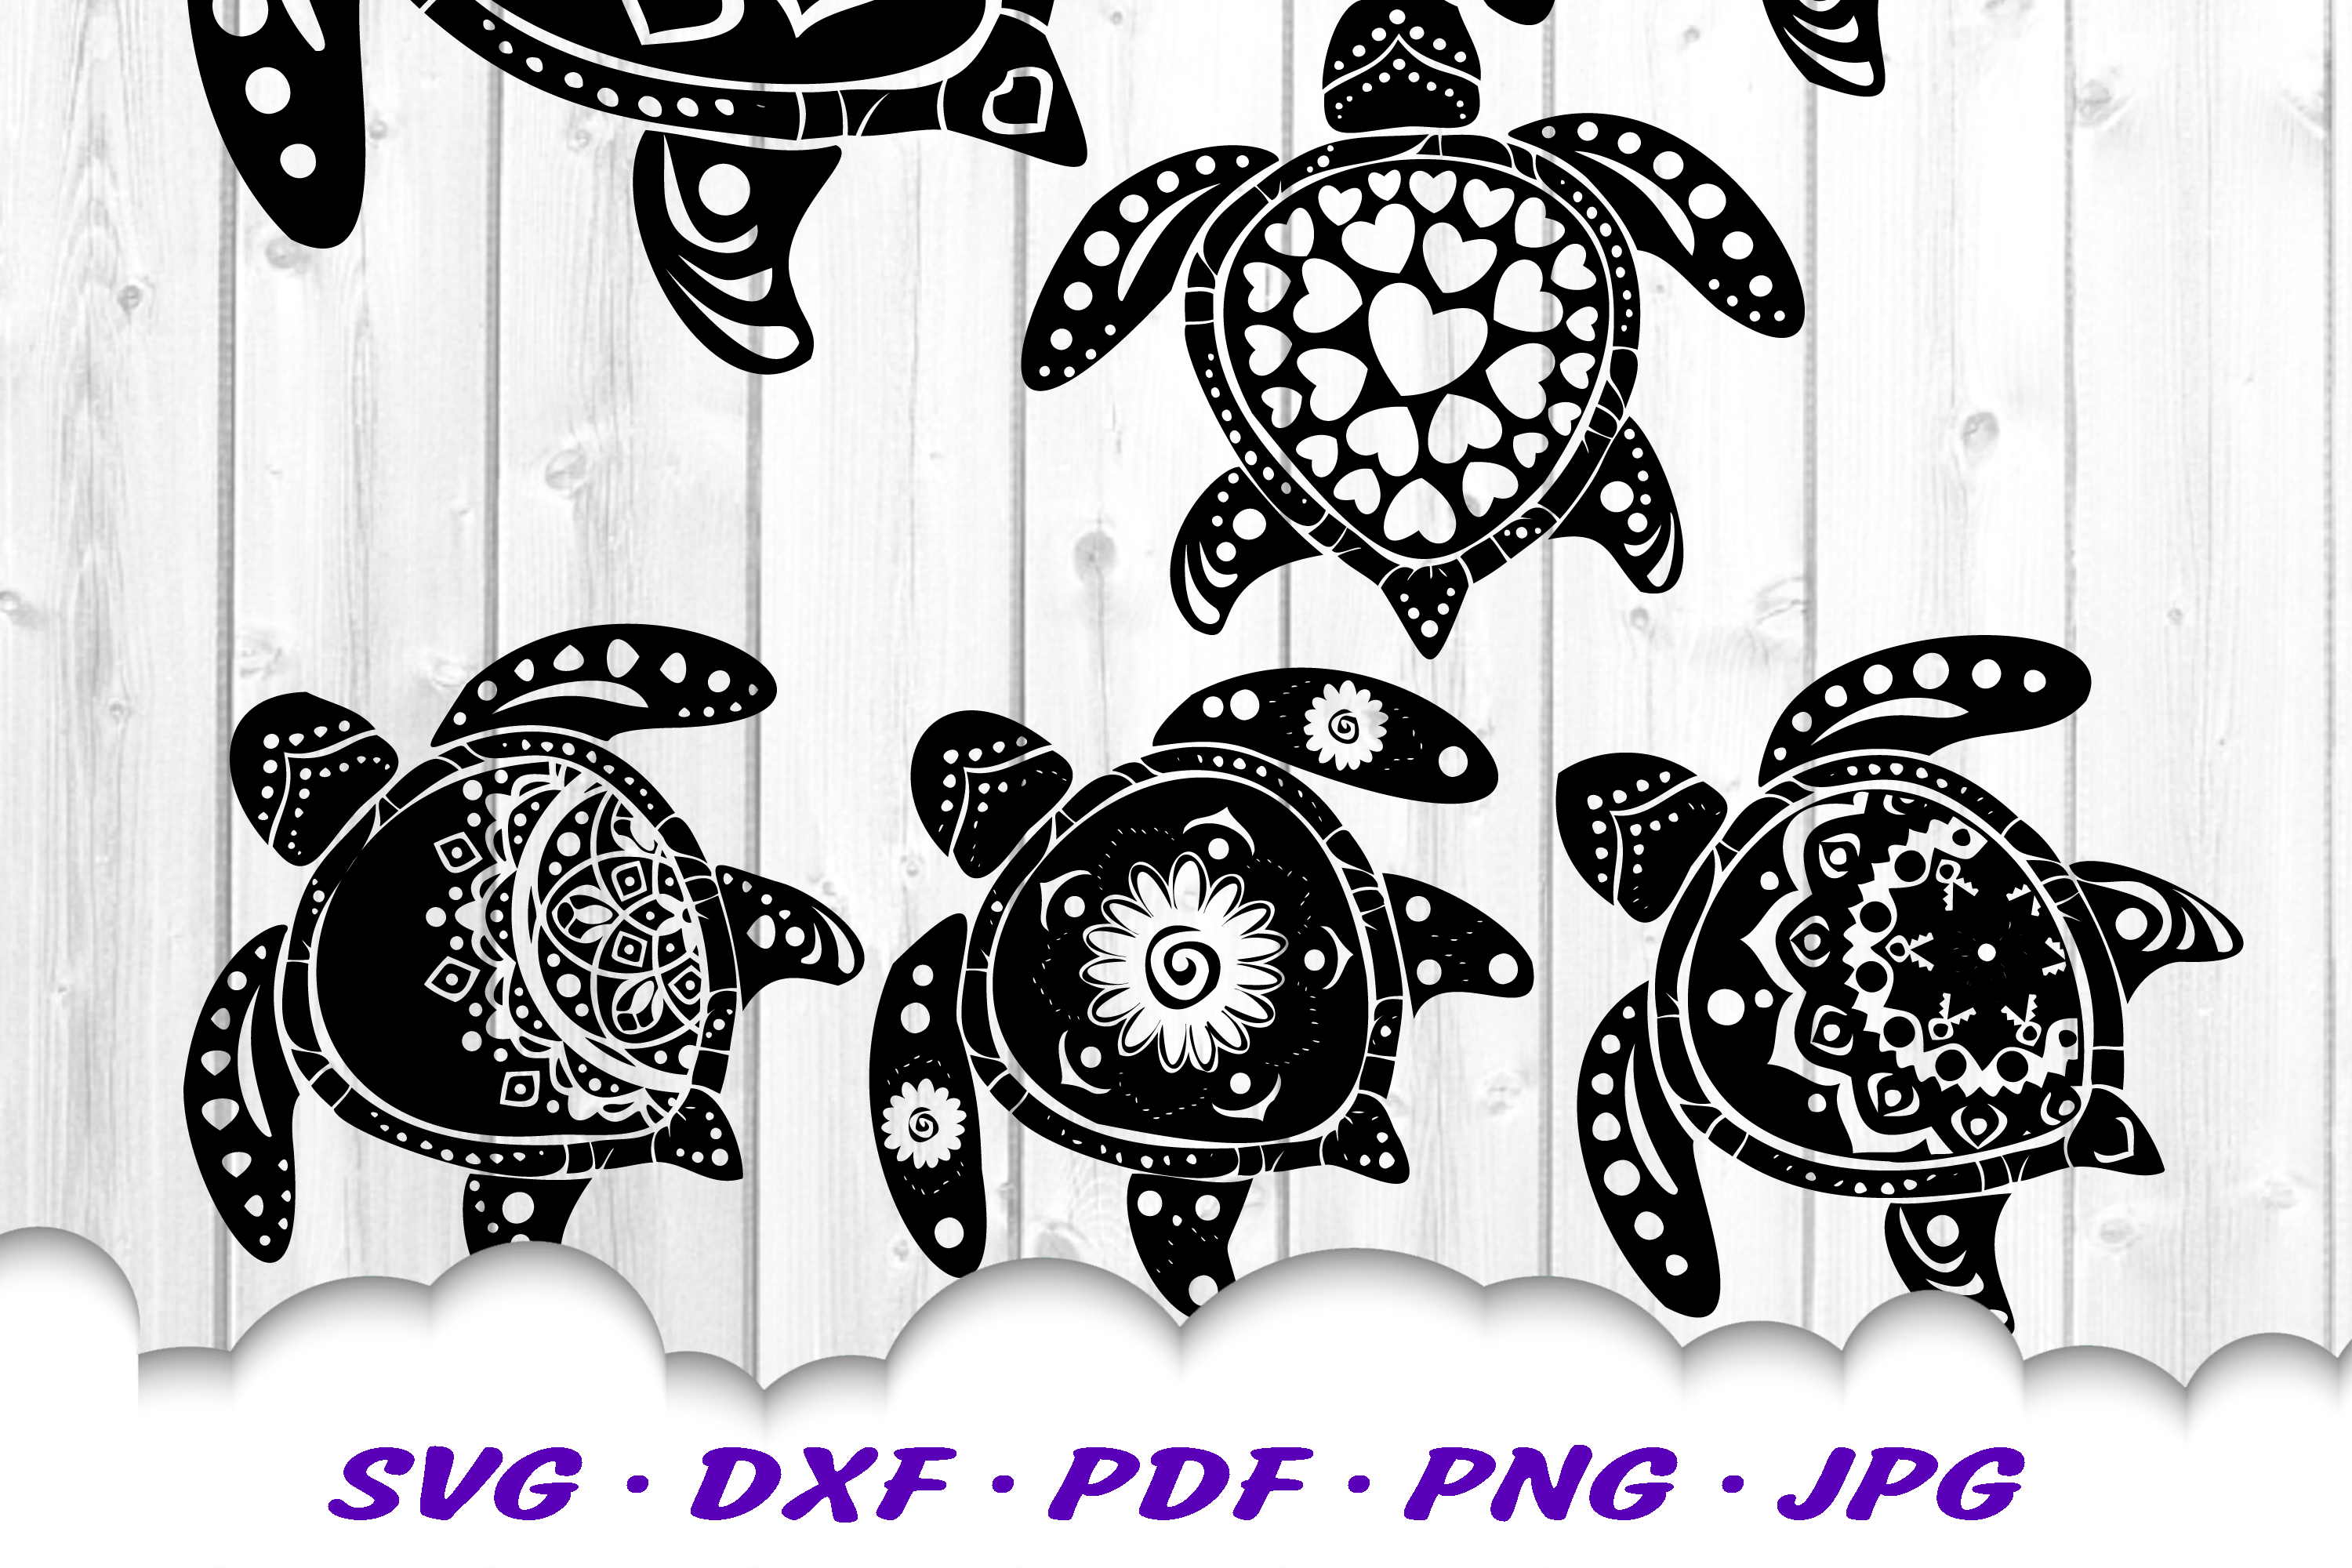 Sea Turtle Mandala Zentangle Front And Back View Svg Dxf Eps Png Pdf